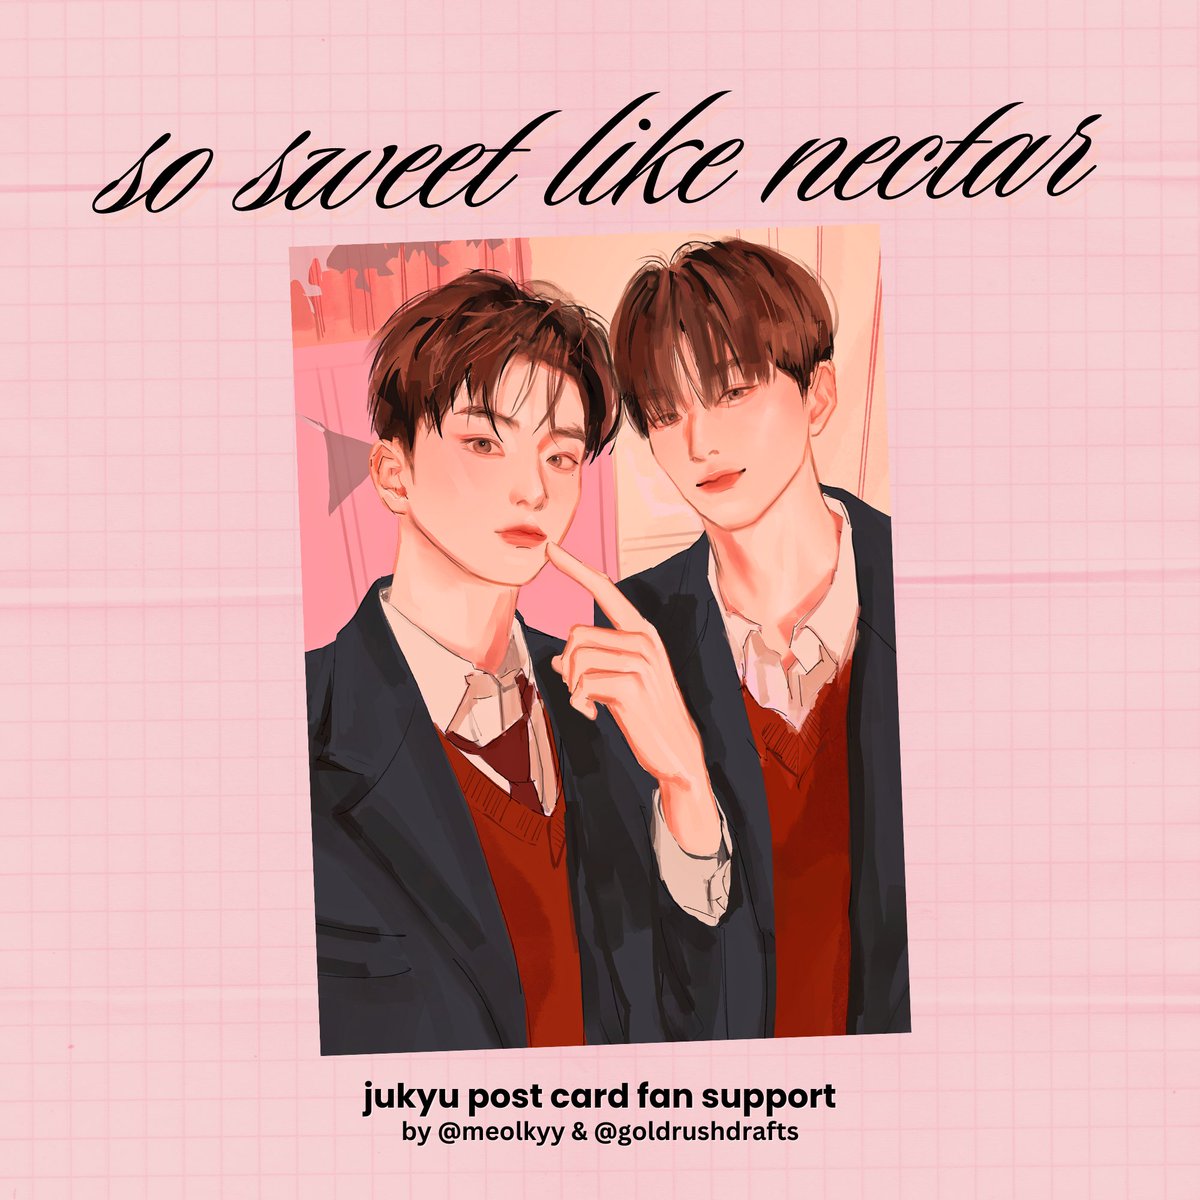 we will be giving away jukyu post cards at #KWAVEMusicFestival!

- limited quantity only
- mbf @goldrushdrafts & @meolkyy
- like & rt this post 
- just say hi on d-day!! 

time & loc: tba 
also open for trades! just send a dm :)
see you there! ♡